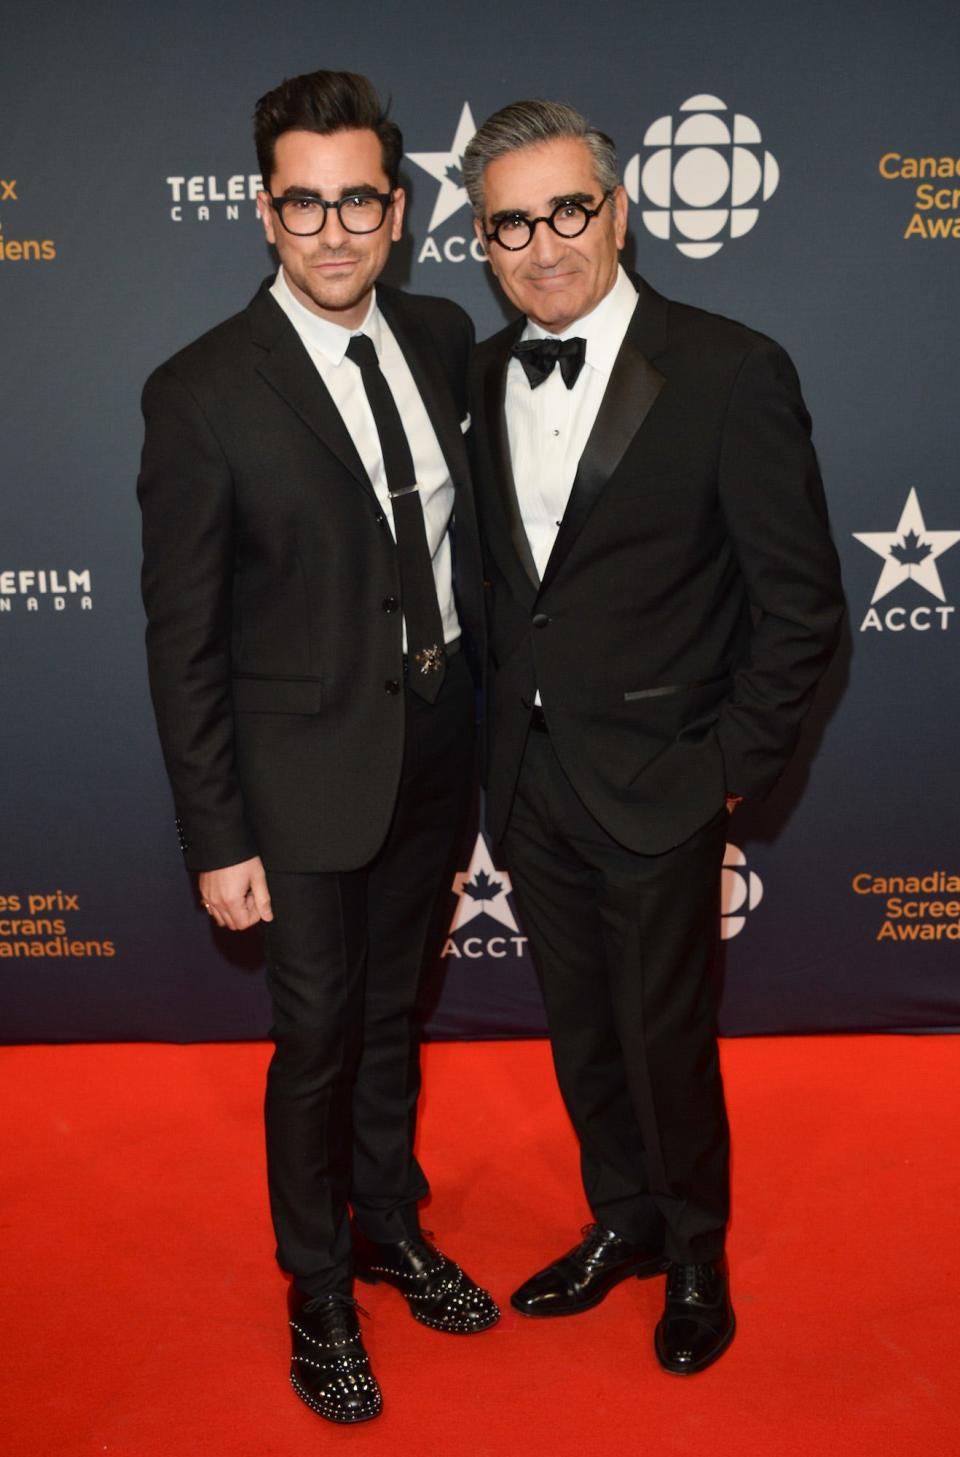 Dan Levy and Eugene Levy pose together in suits and glasses at the 2015 Canadian Screen Awards.